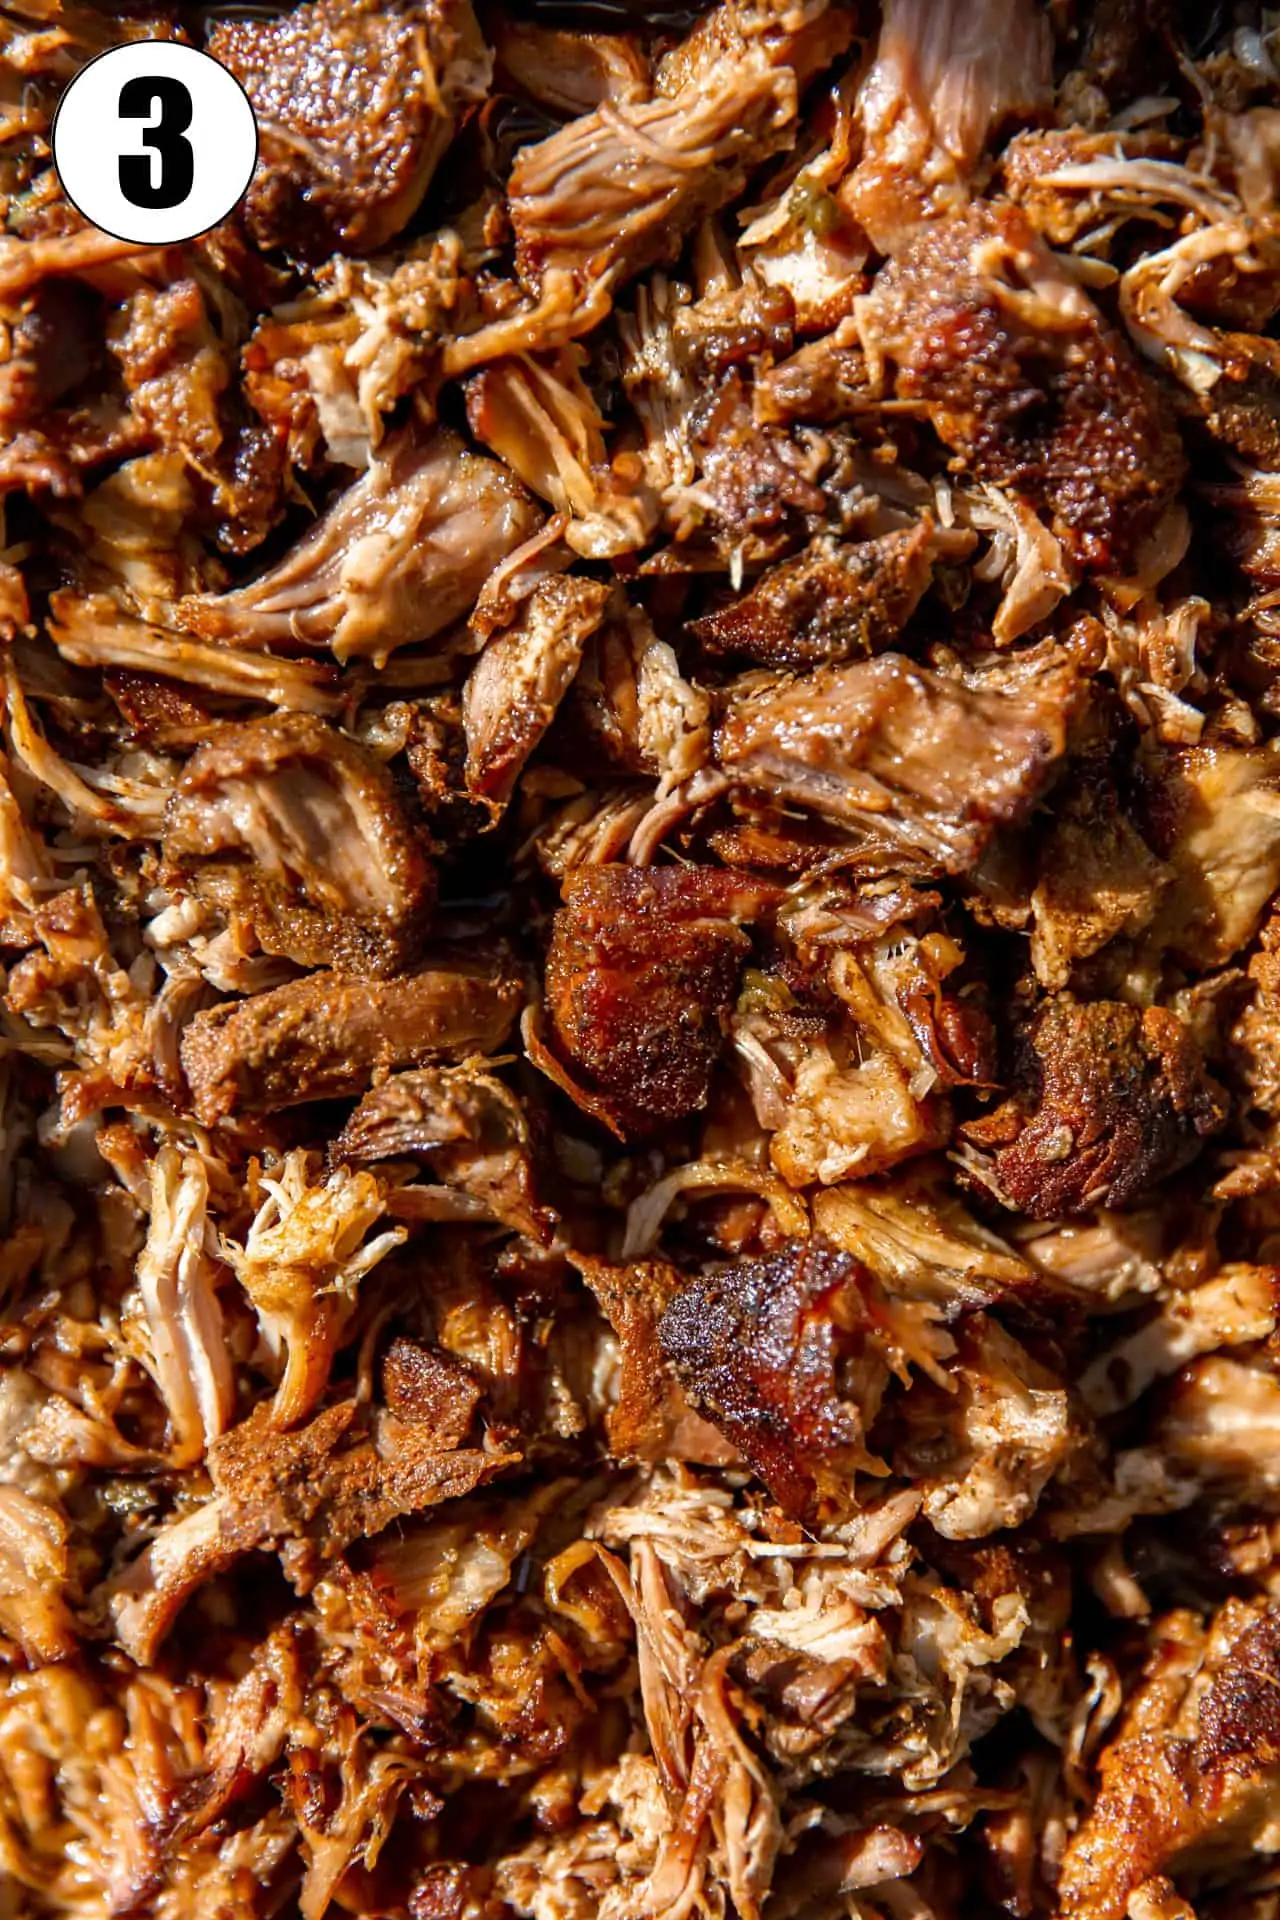 Up close view of shredded pork that has been crisped under a broiler.